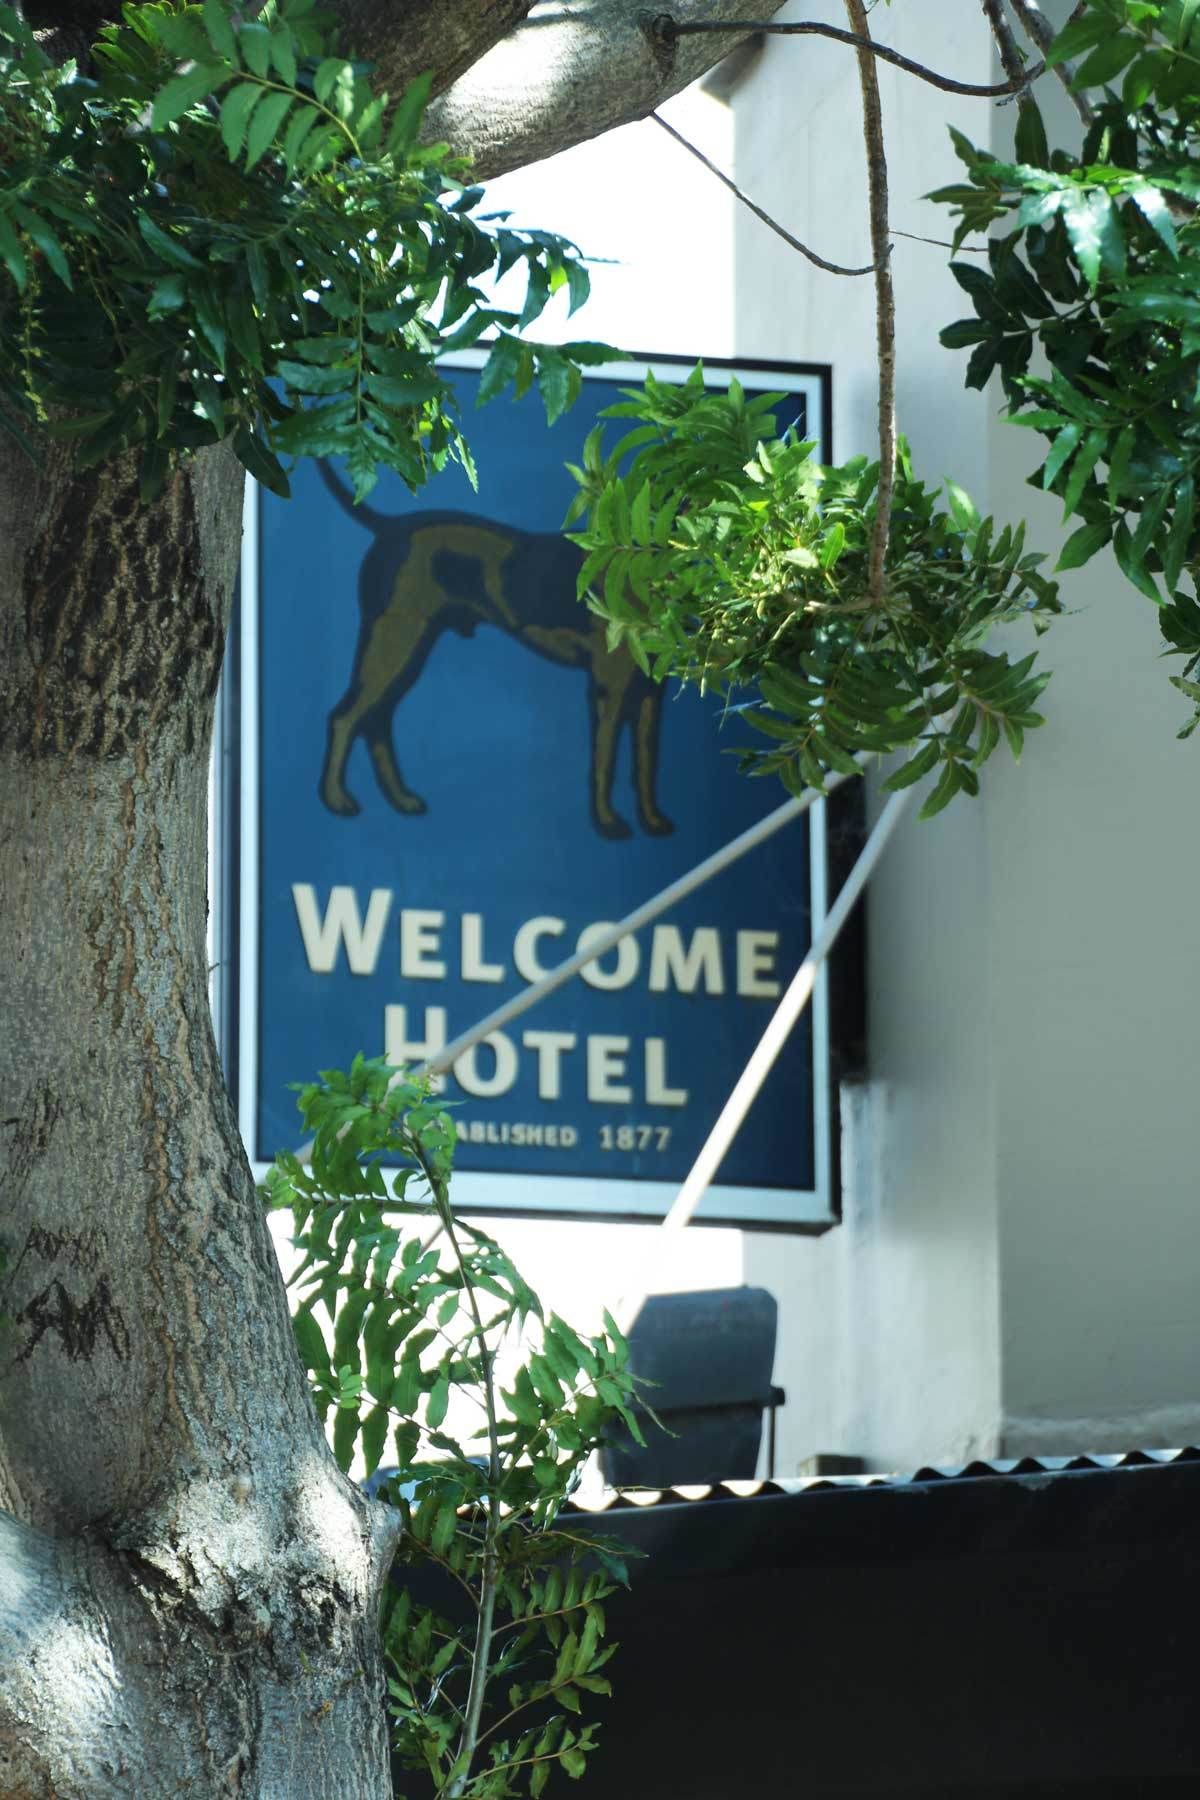 The Welcome Hotel